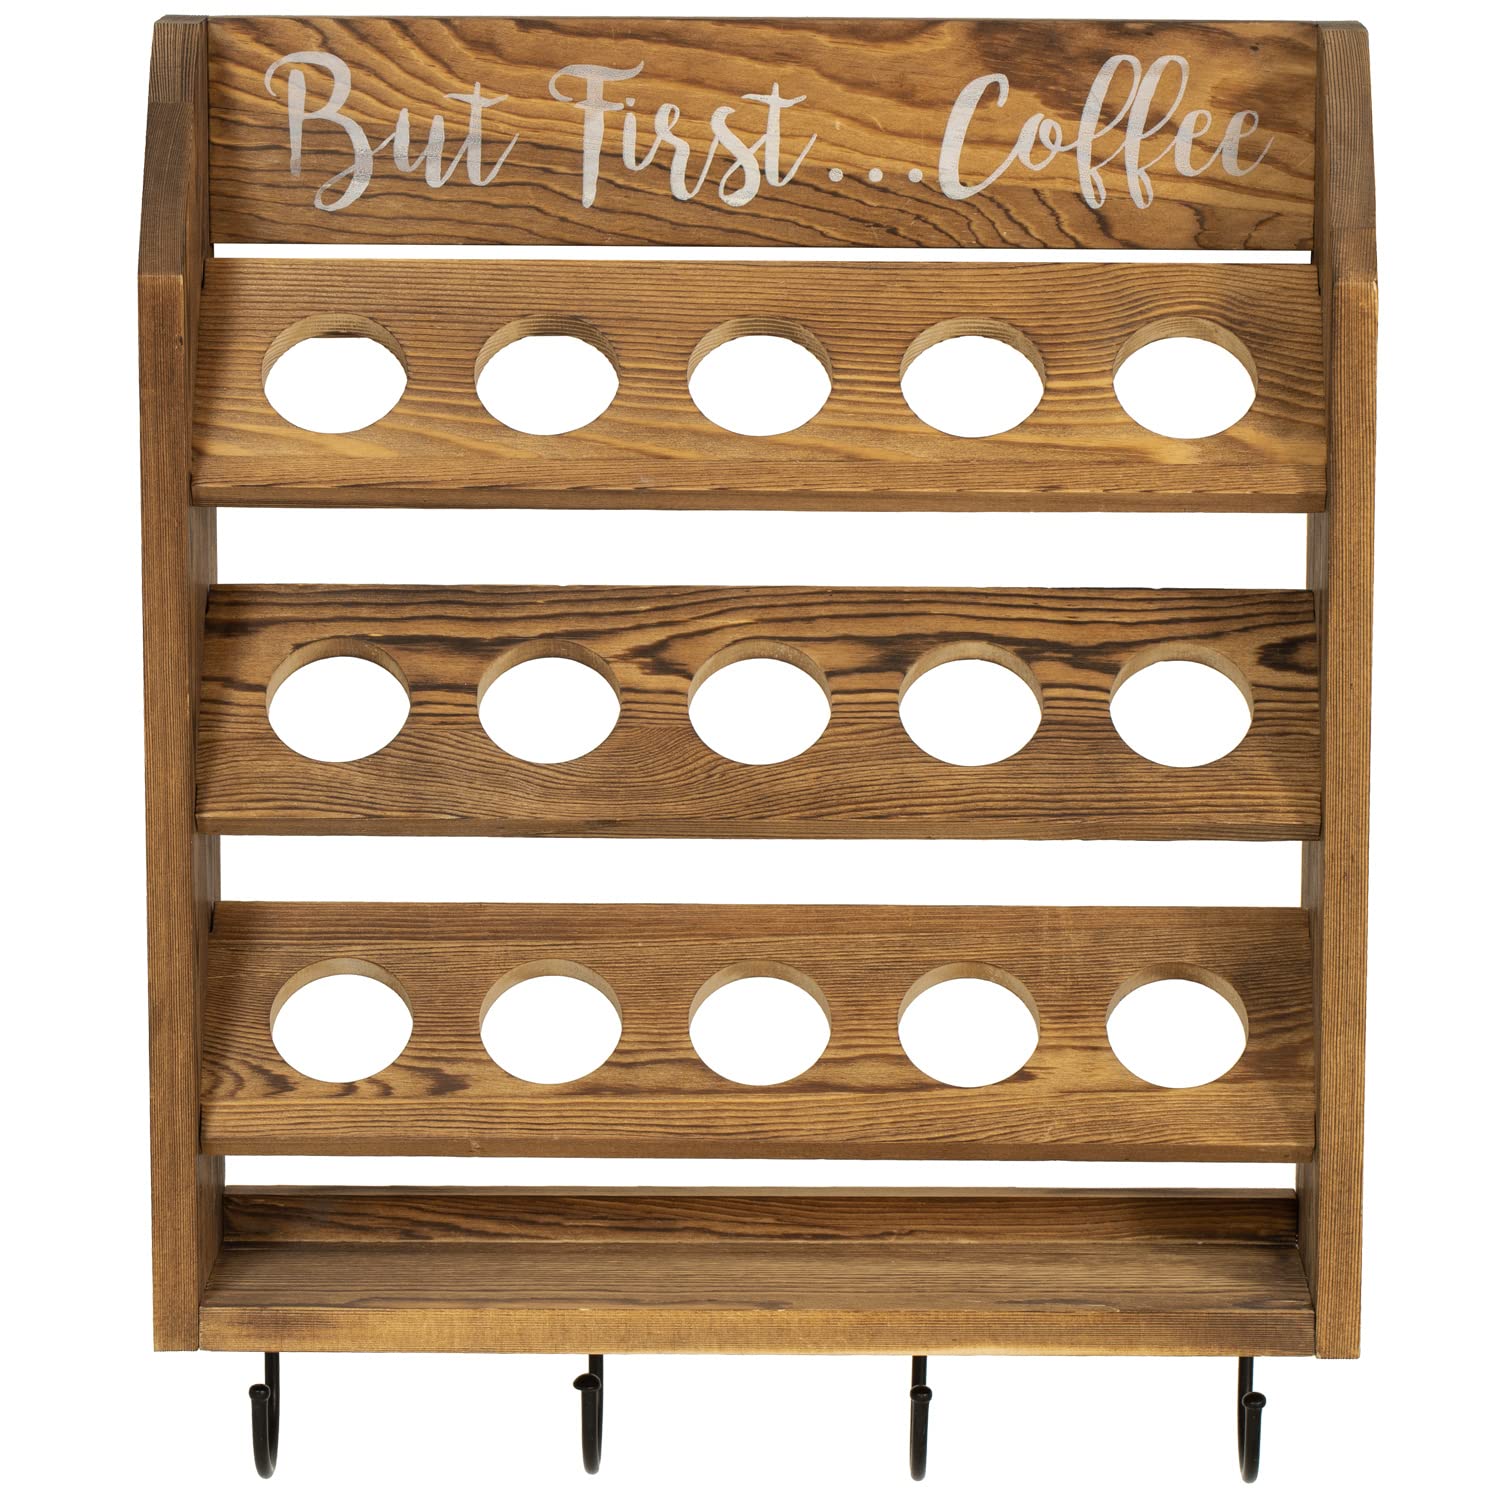 MyGift Wall Mounted Rustic Burnt Solid Wood Coffee Pod Holder for K Cups Espresso Pod Storage Rack and Coffee Mug Holder with 4 Hooks and But First Coffee Quote